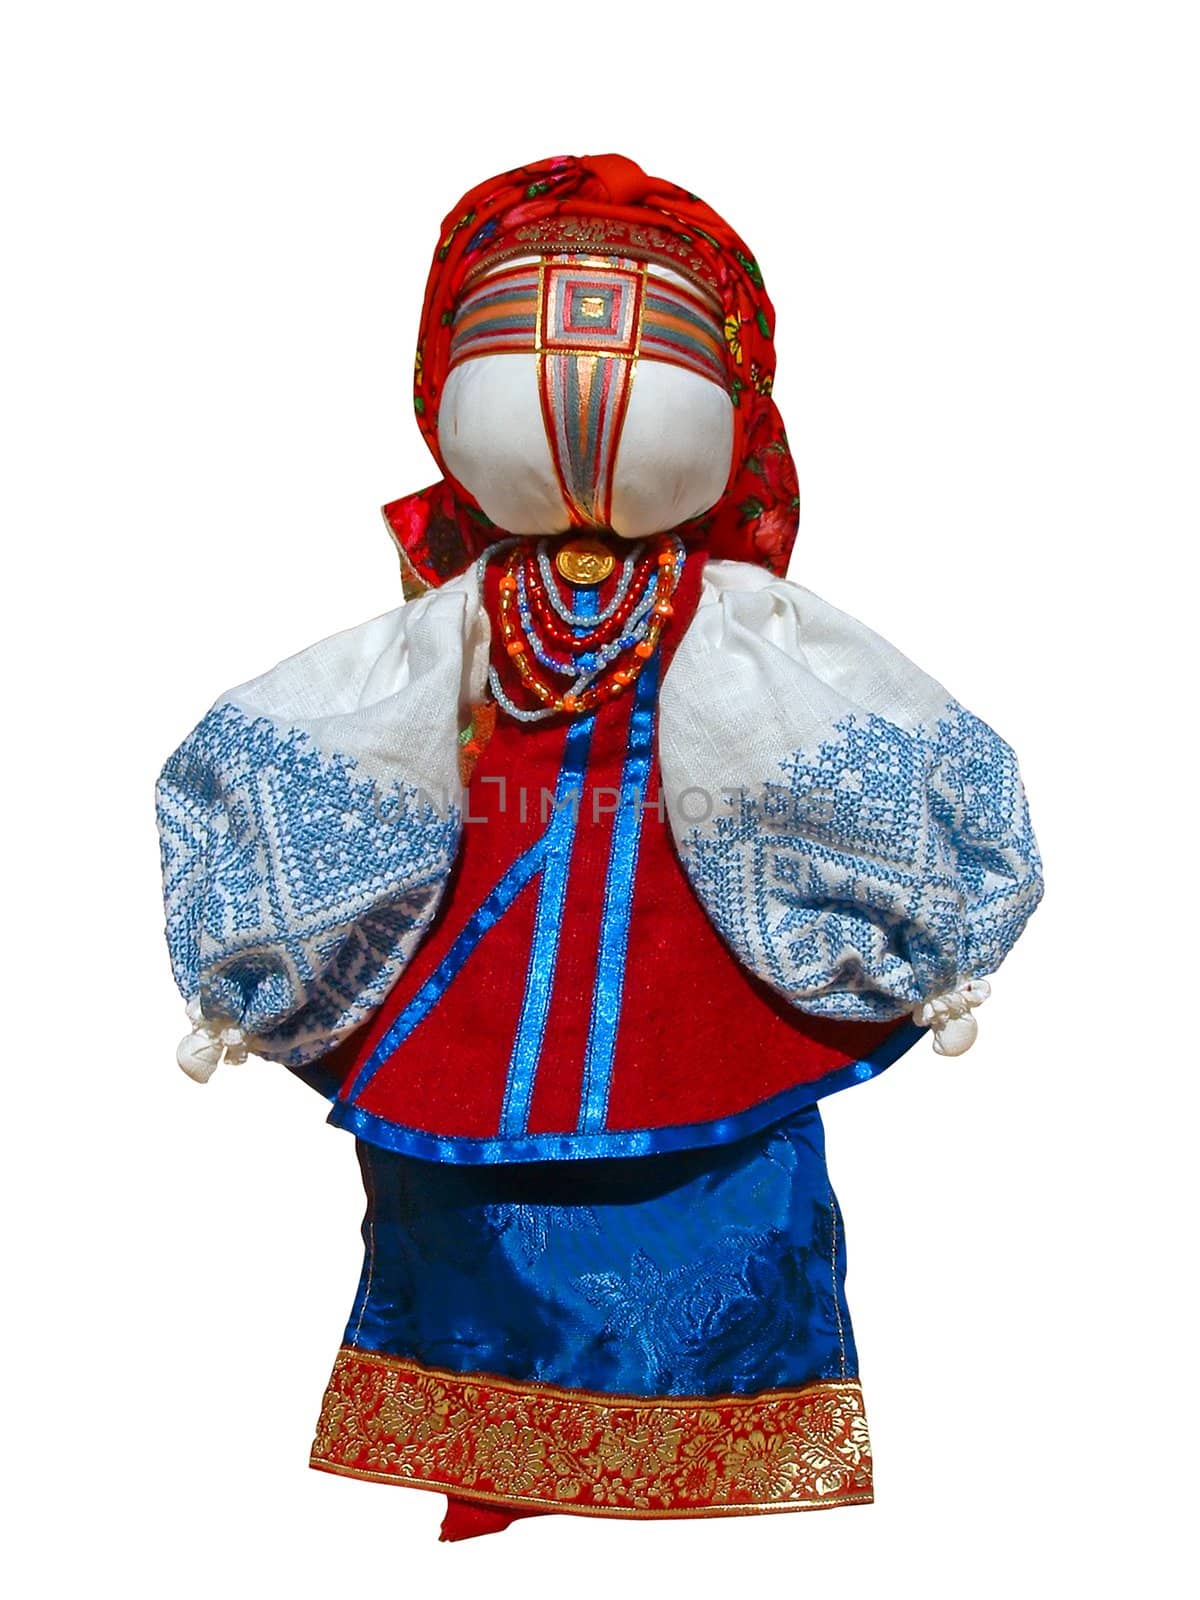 Ukrainian ancient folklore product "motanka" by which children at early age are played.